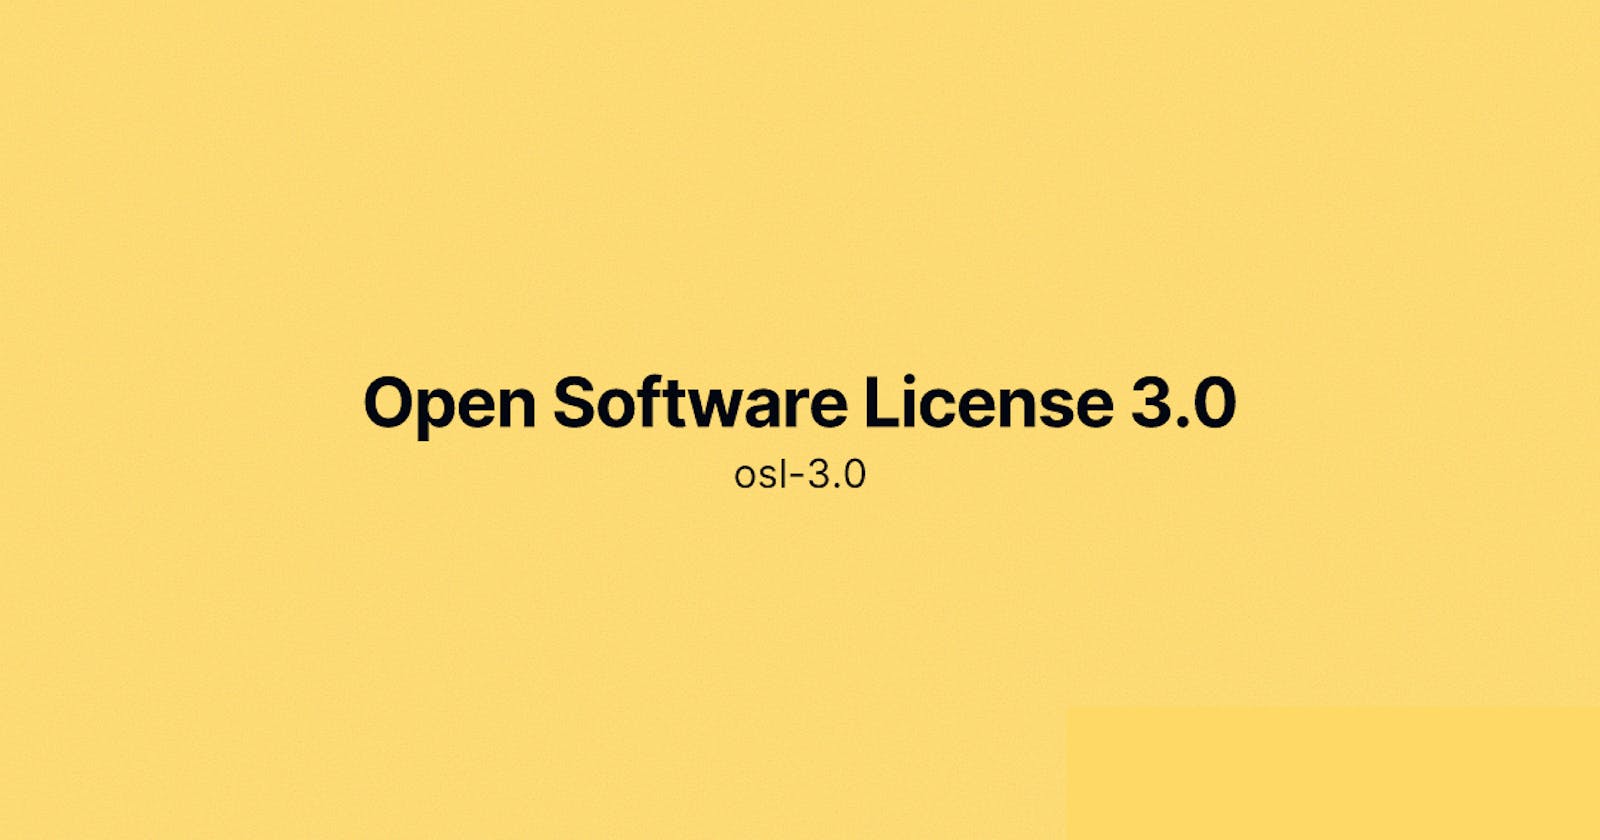 Open Software License 3.0